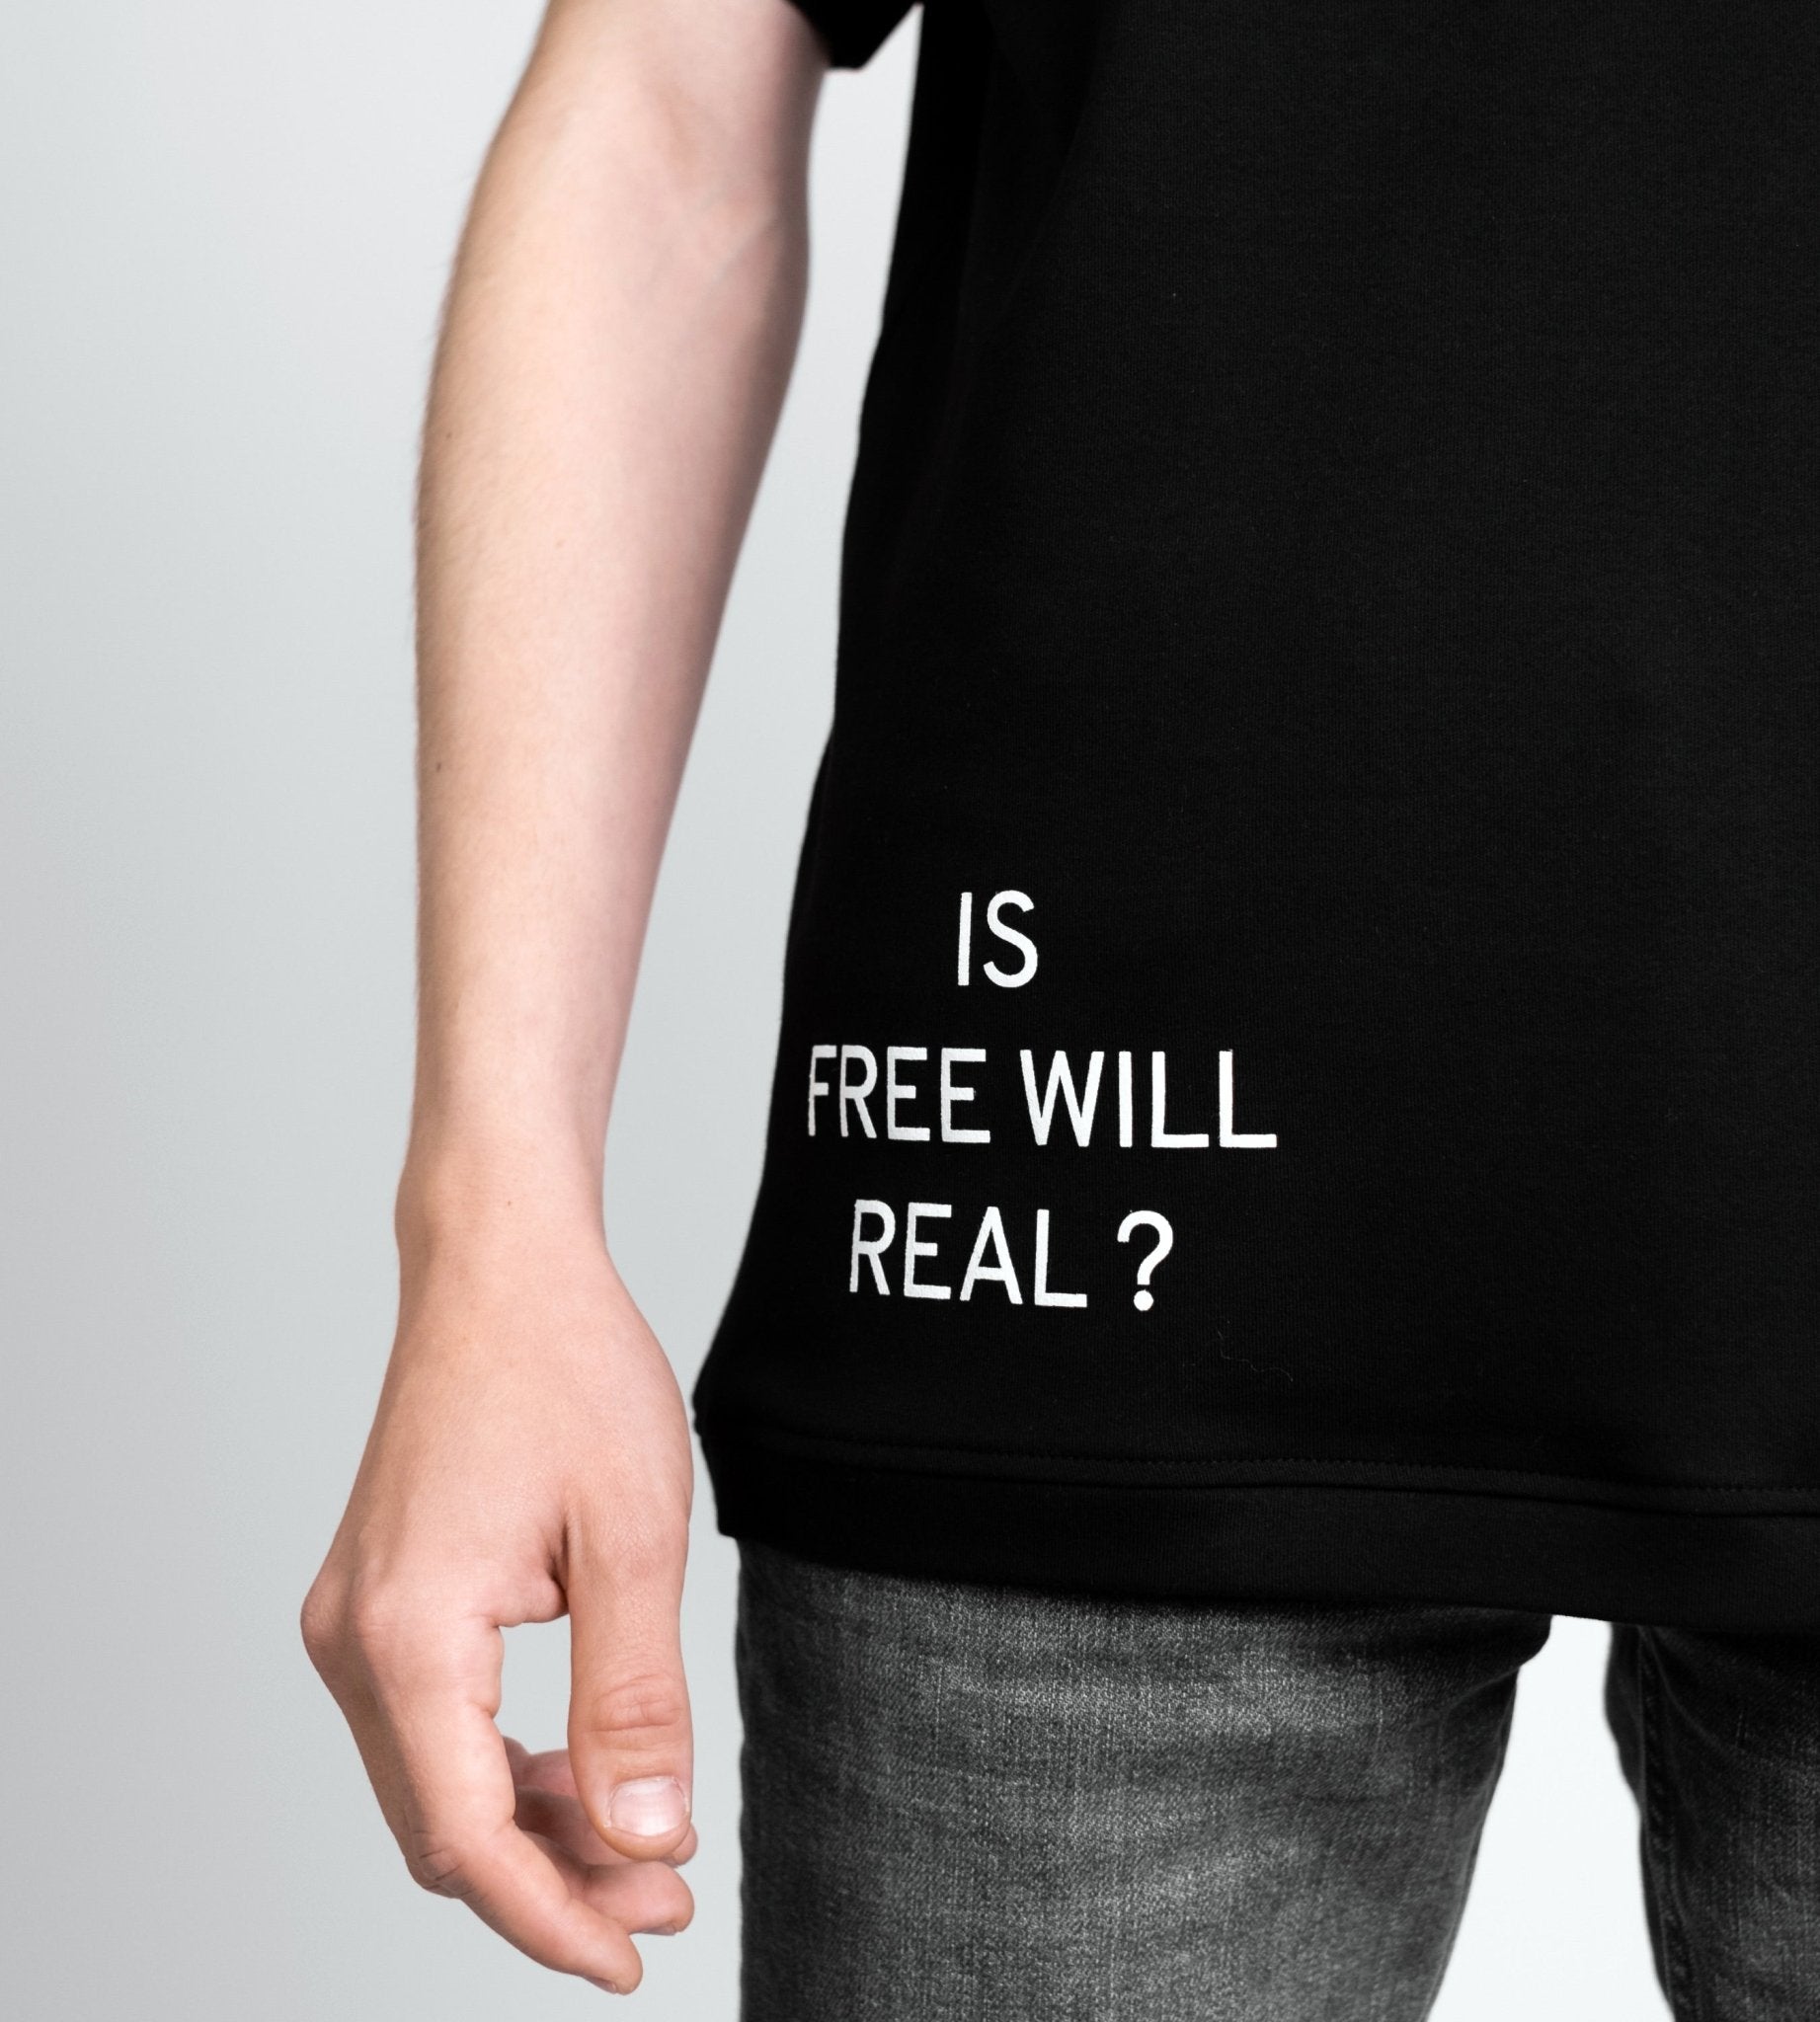 Is free will real or just an illusion? - OBLIVIOUS?